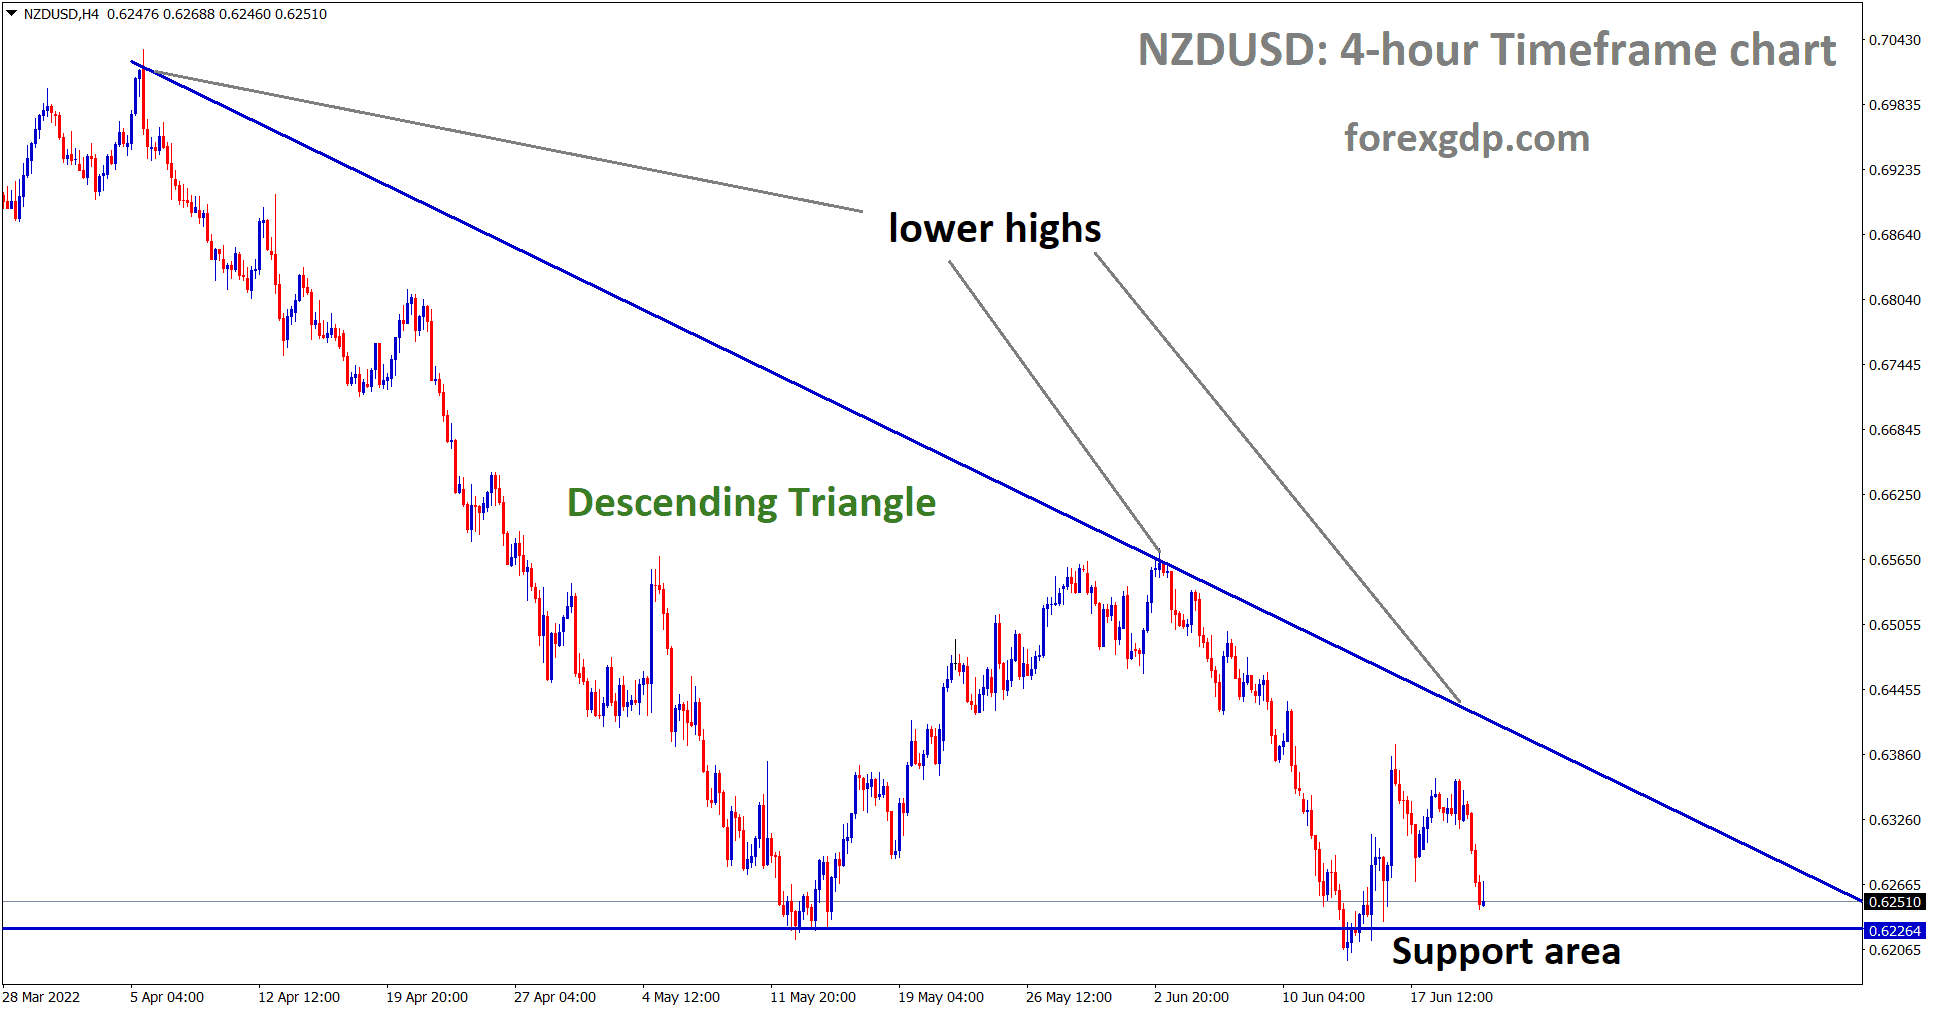 NZDUSD is moving in a descending triangle pattern and the market has reached the support area of the pattern.